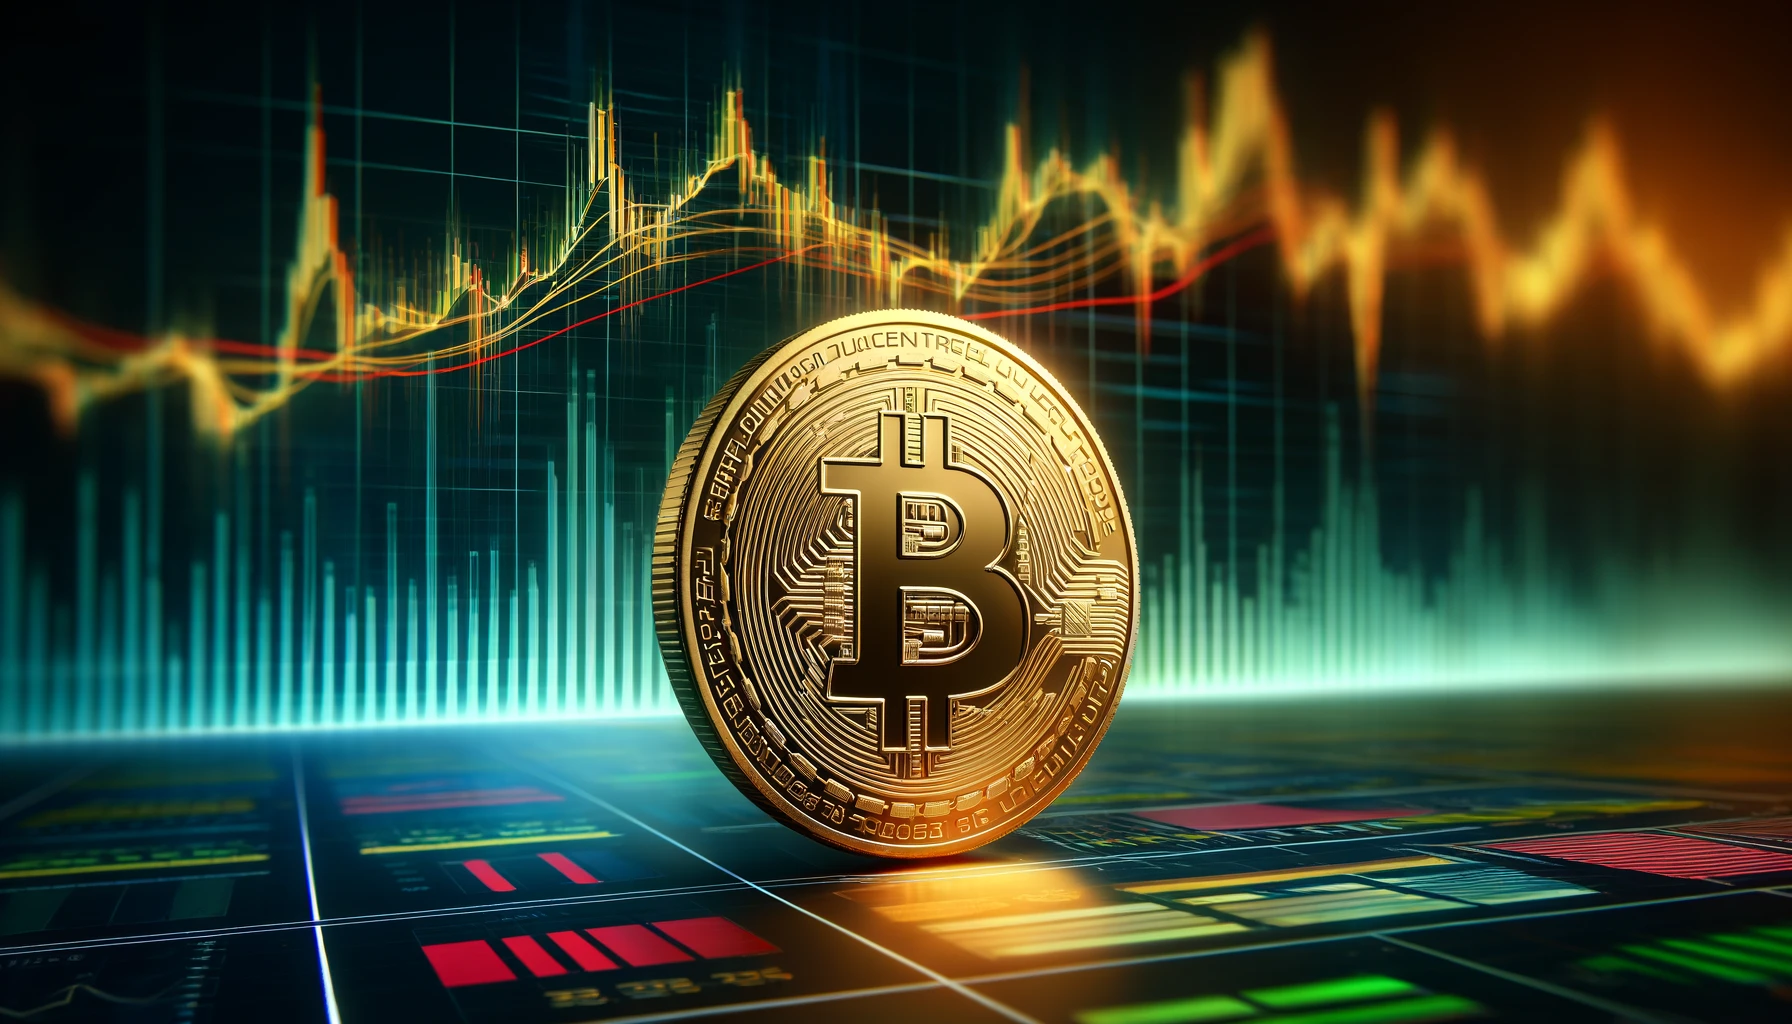 Bitcoin Crashed Below $55,000 But Traders Are Not Fearful, Why?